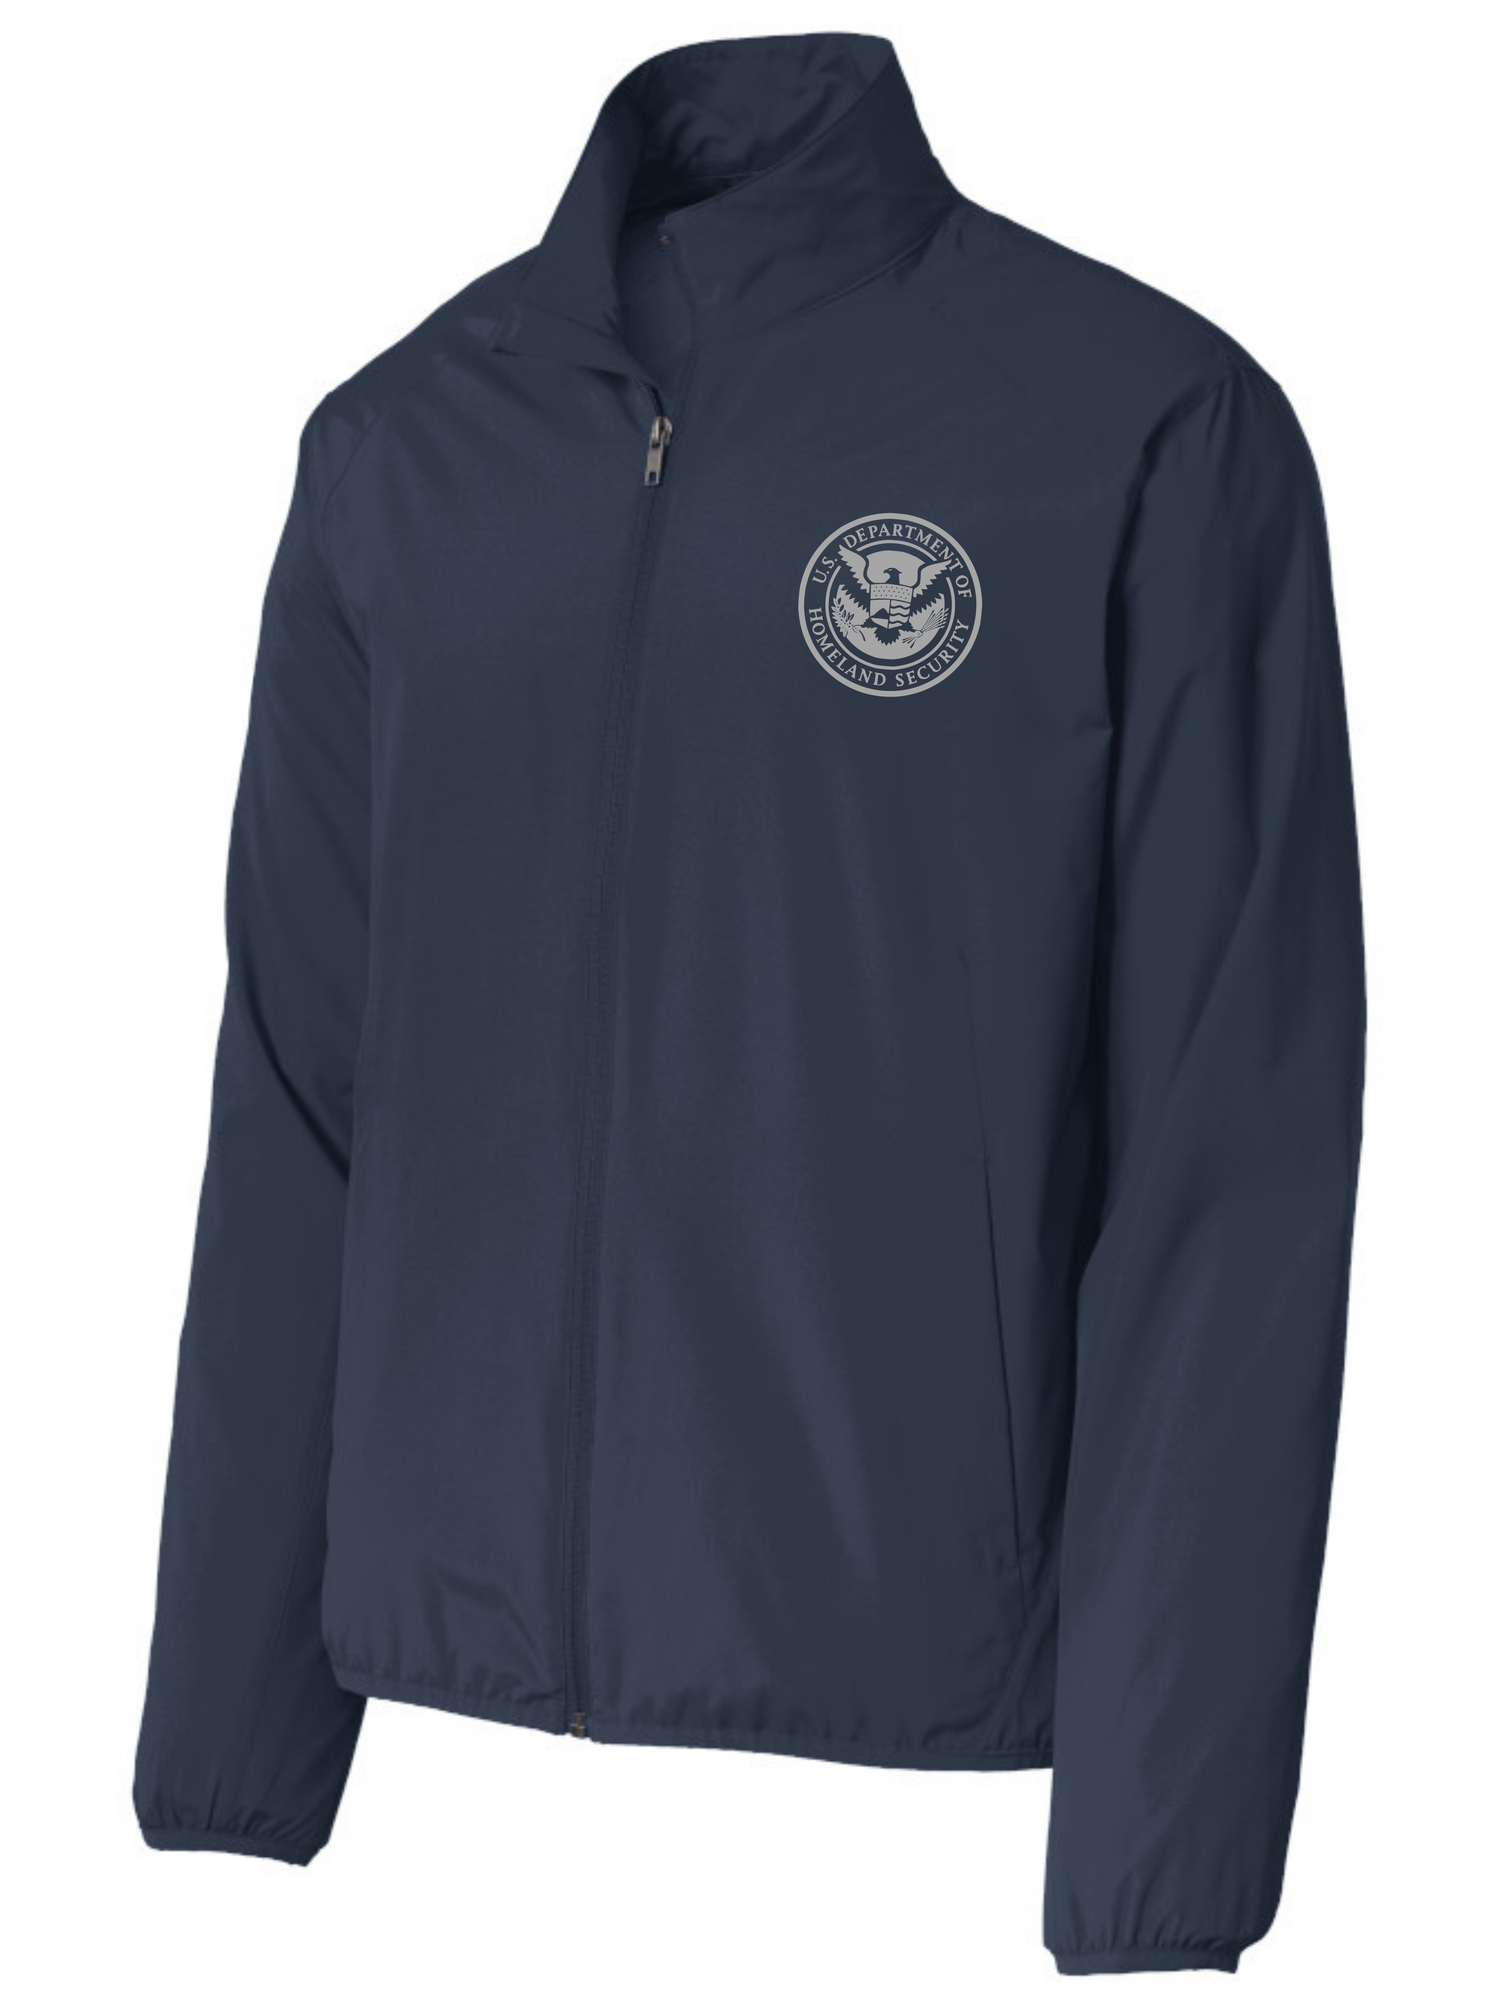 DHS POLICE AGENCY JACKET – FEDS Apparel